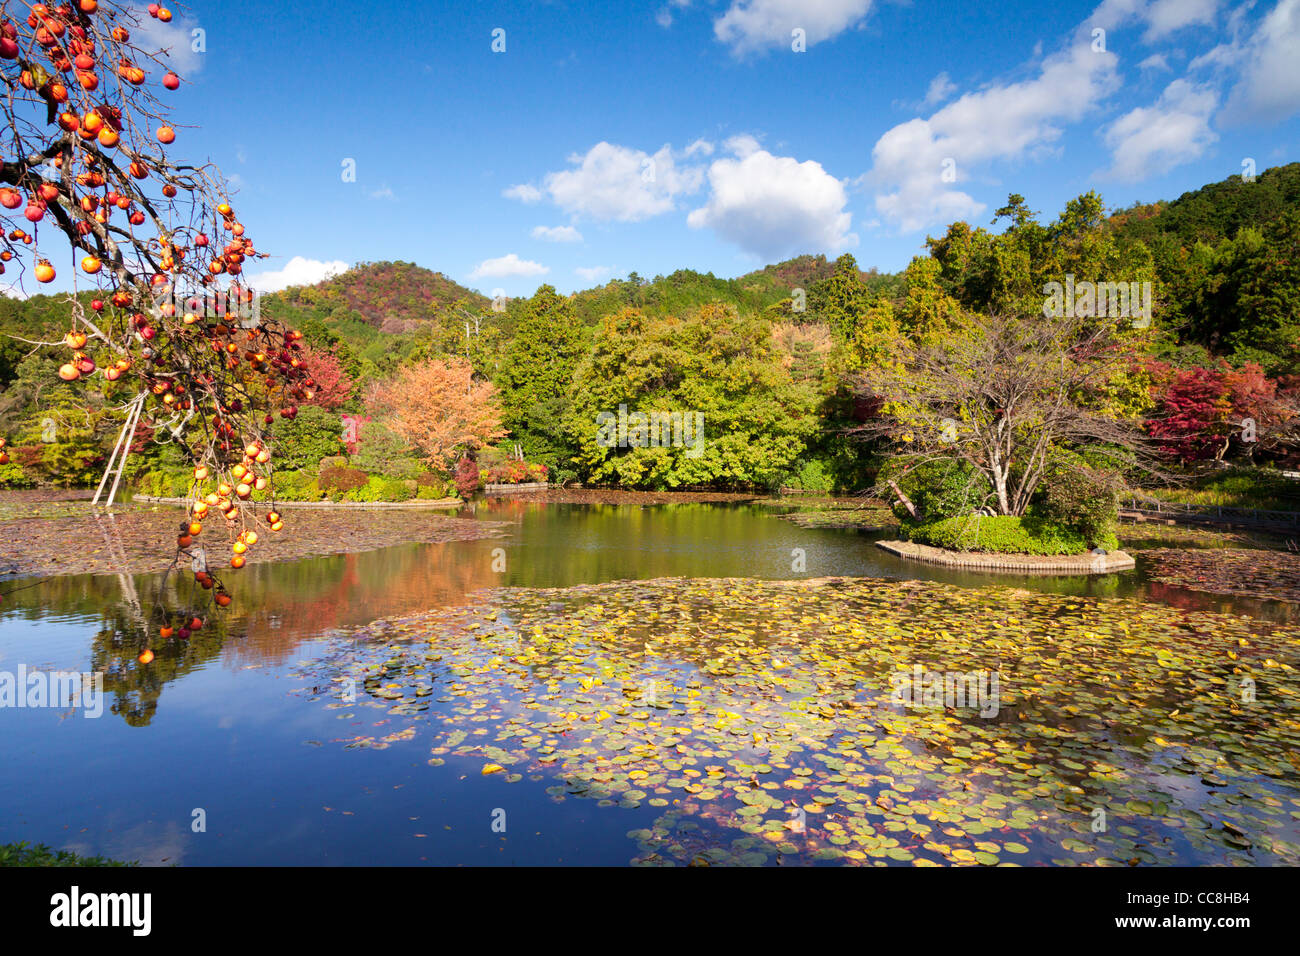 Kyoyochi Pond in the grounds of Ryoan-ji temple, Kyoto, Japan, seen in Autumn. Stock Photo